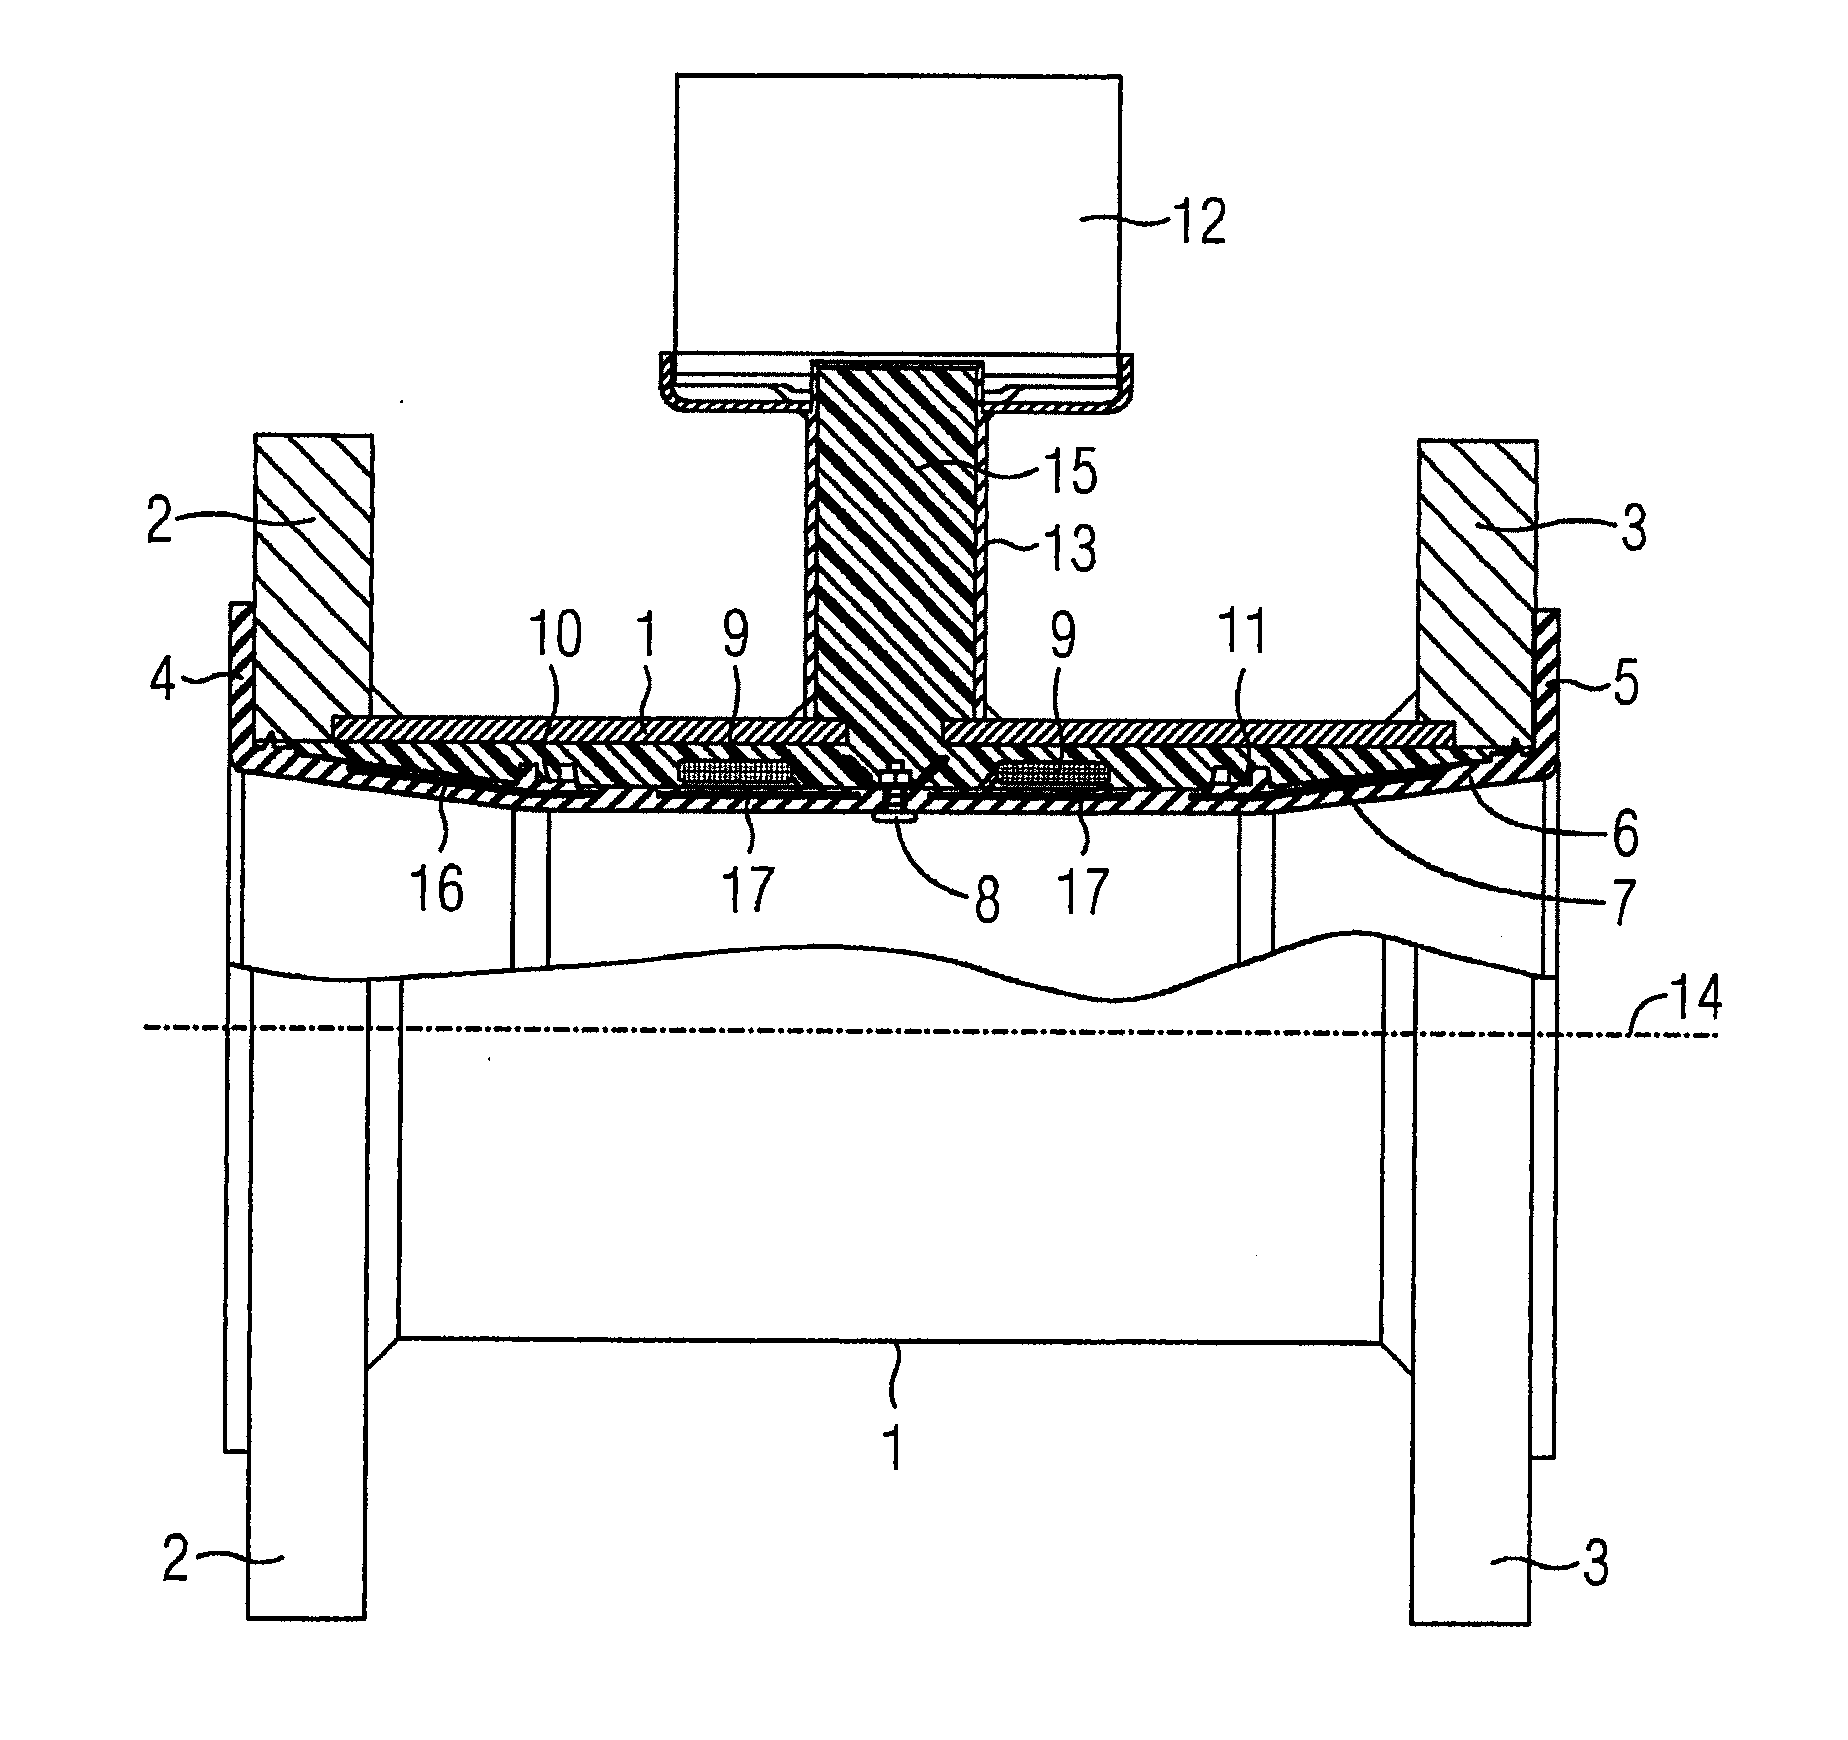 Magnetically inductive flow meter